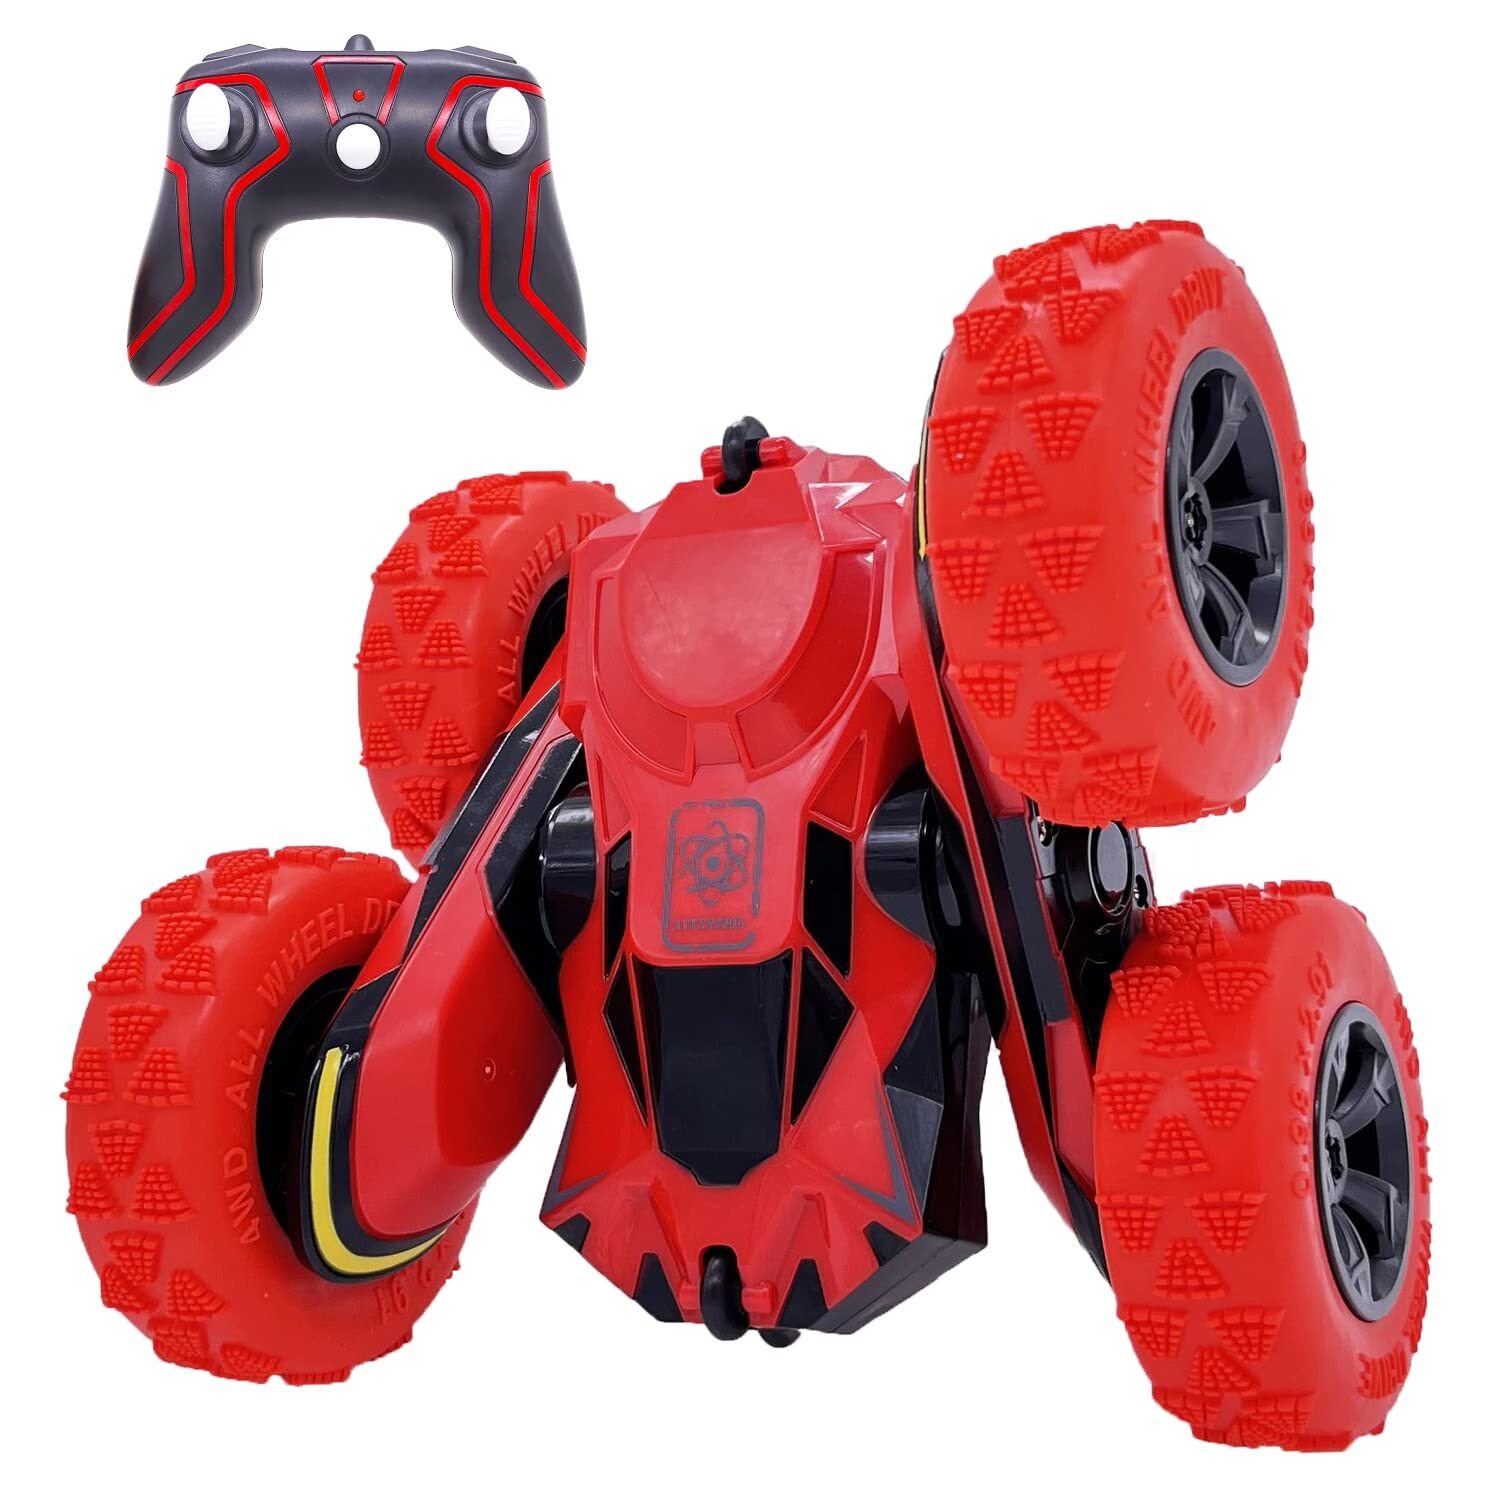 360 degrees rotary remote control stunt car